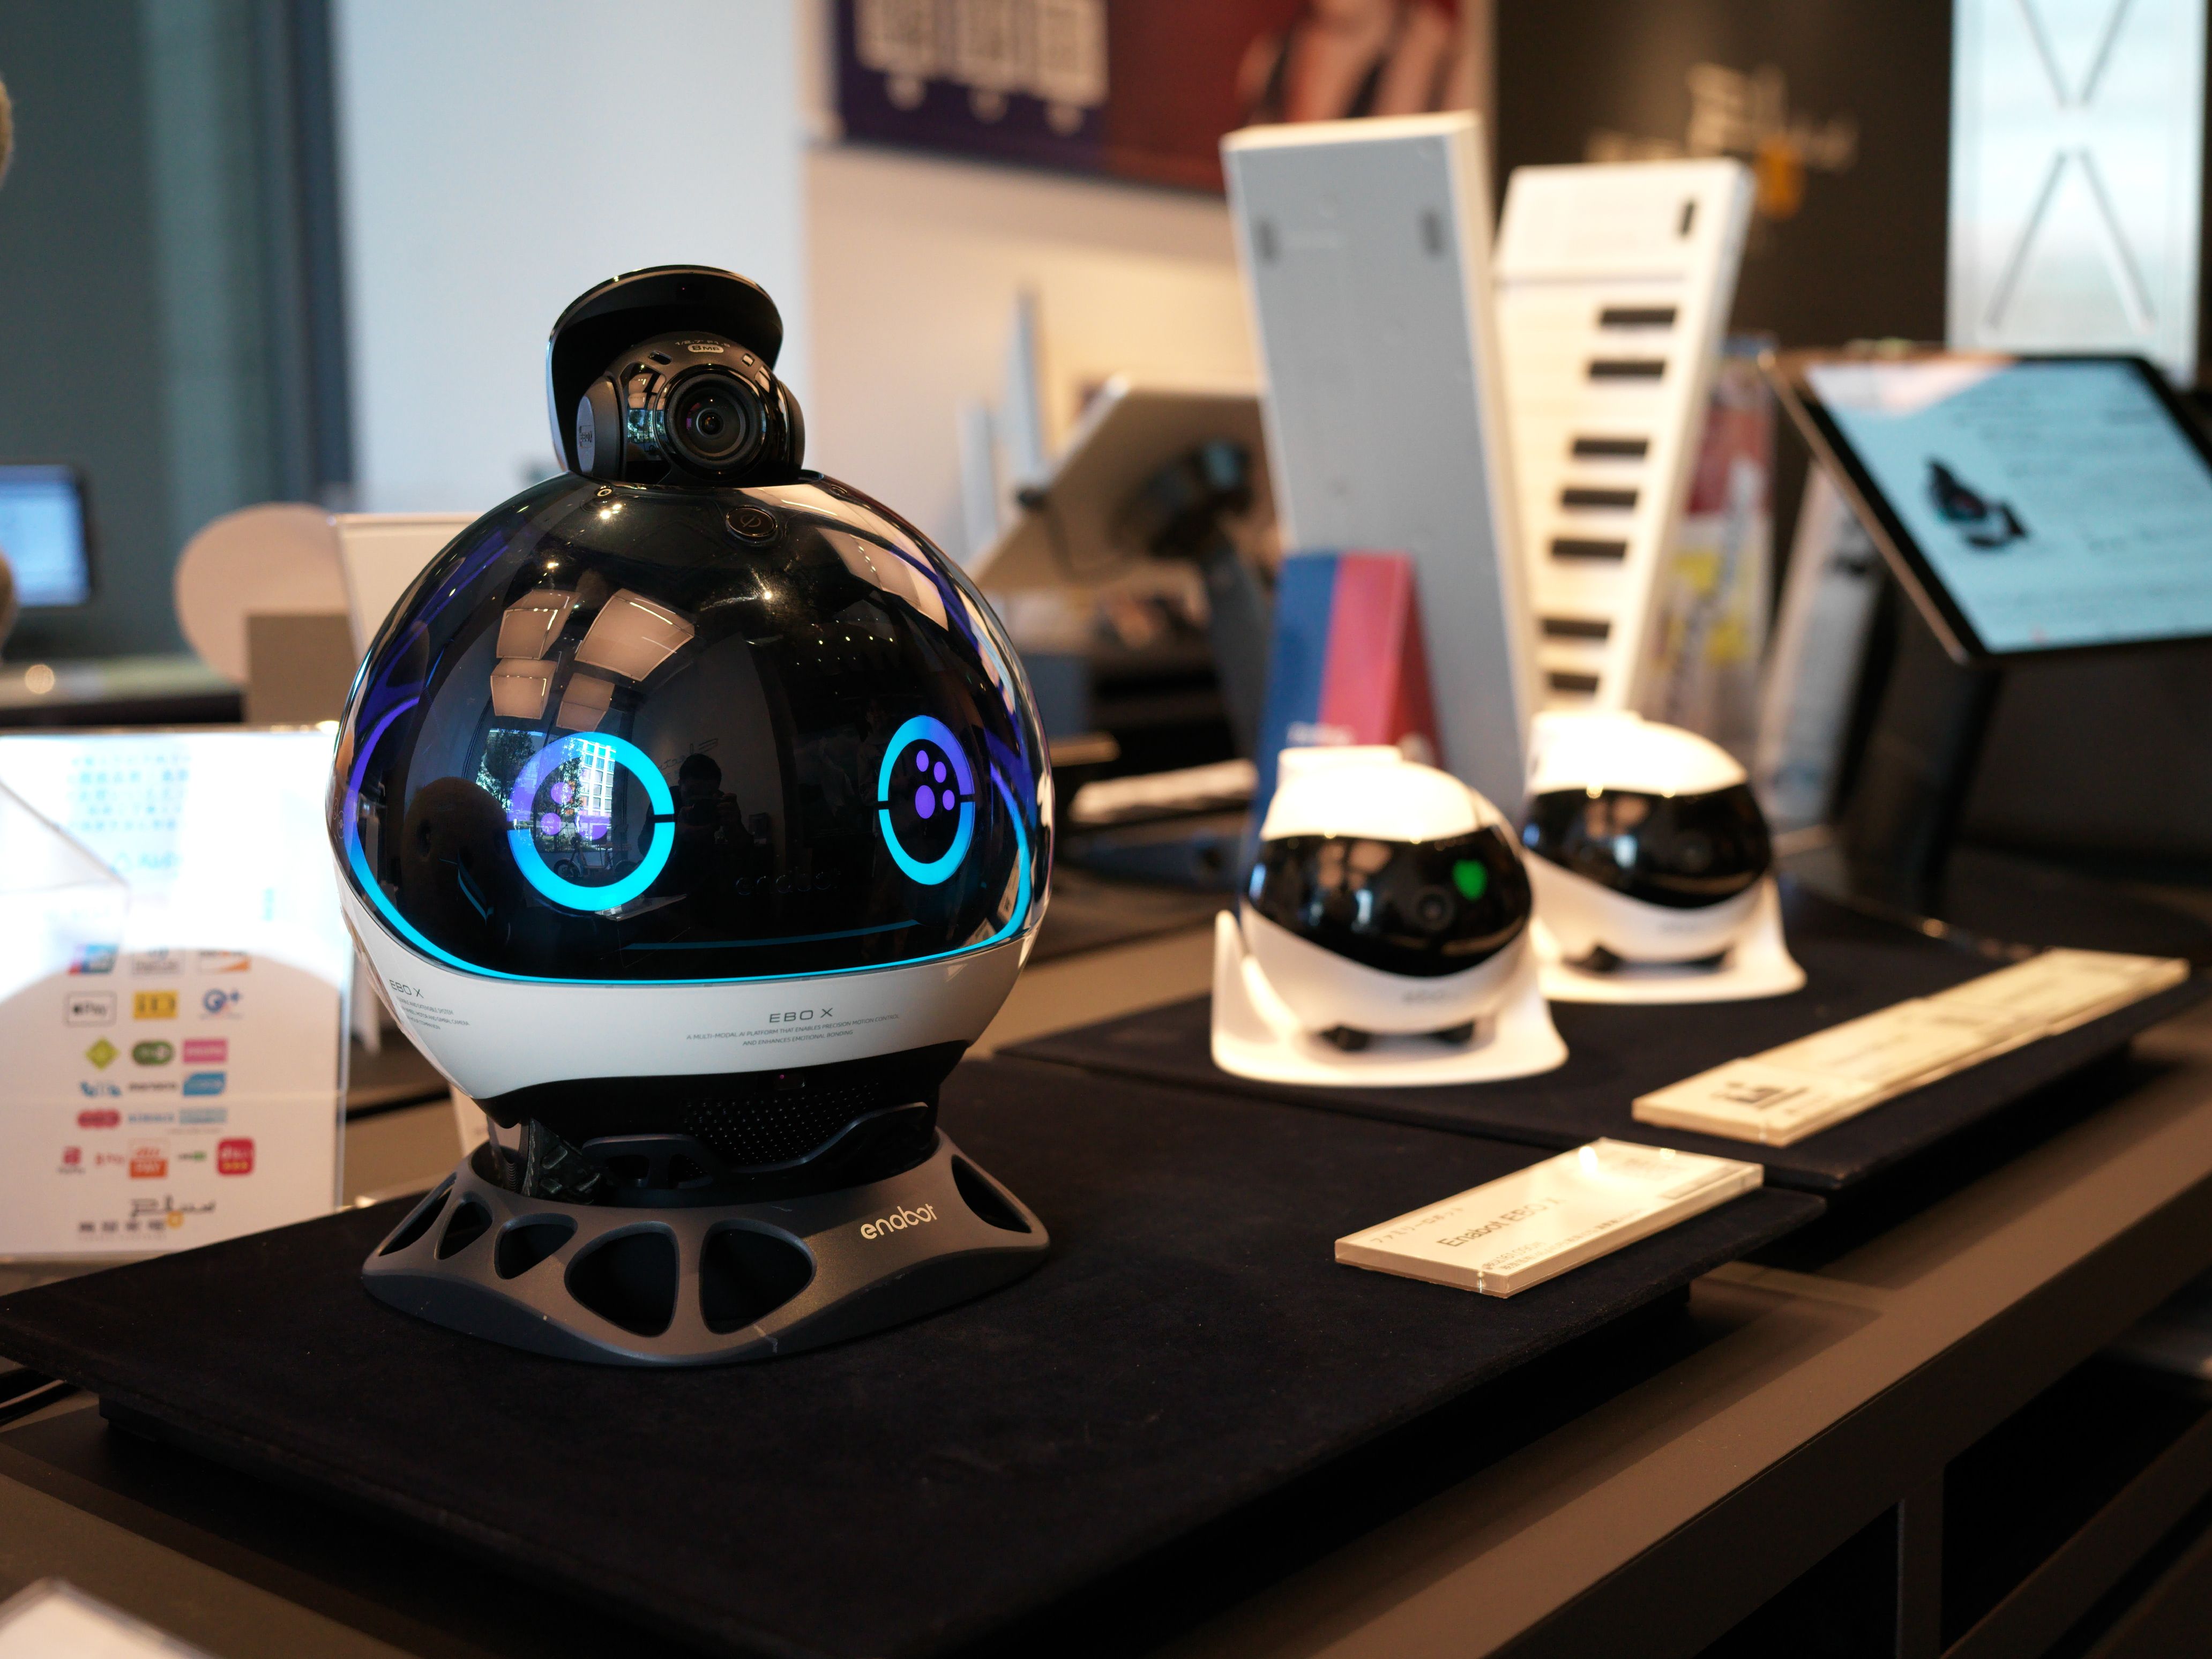 Enabot EBO X family robot and companion - Geeky Gadgets